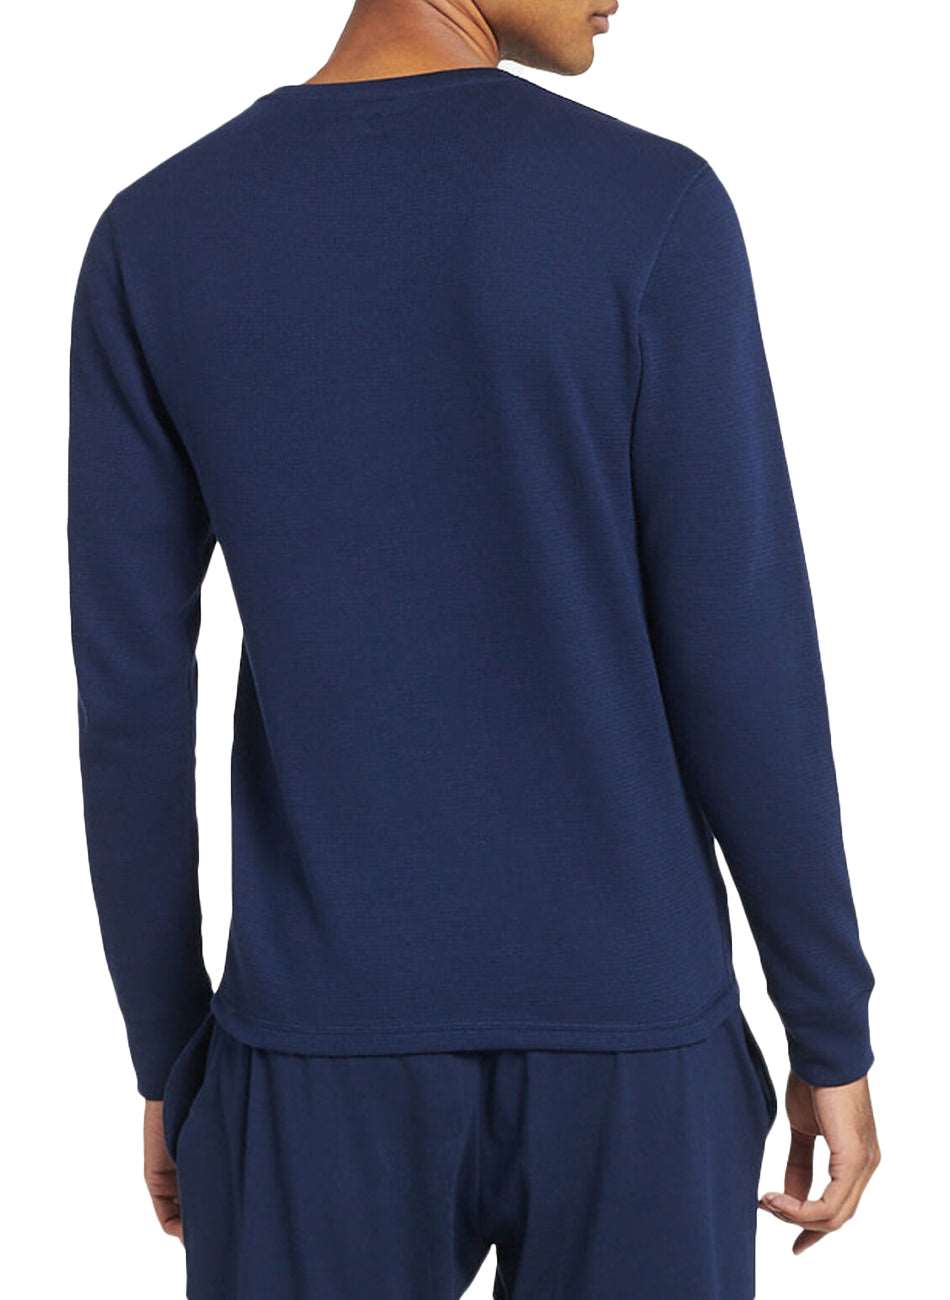 (PW26HF) L/S Crew W/ Bear Embroidery - Navy Boston Commons